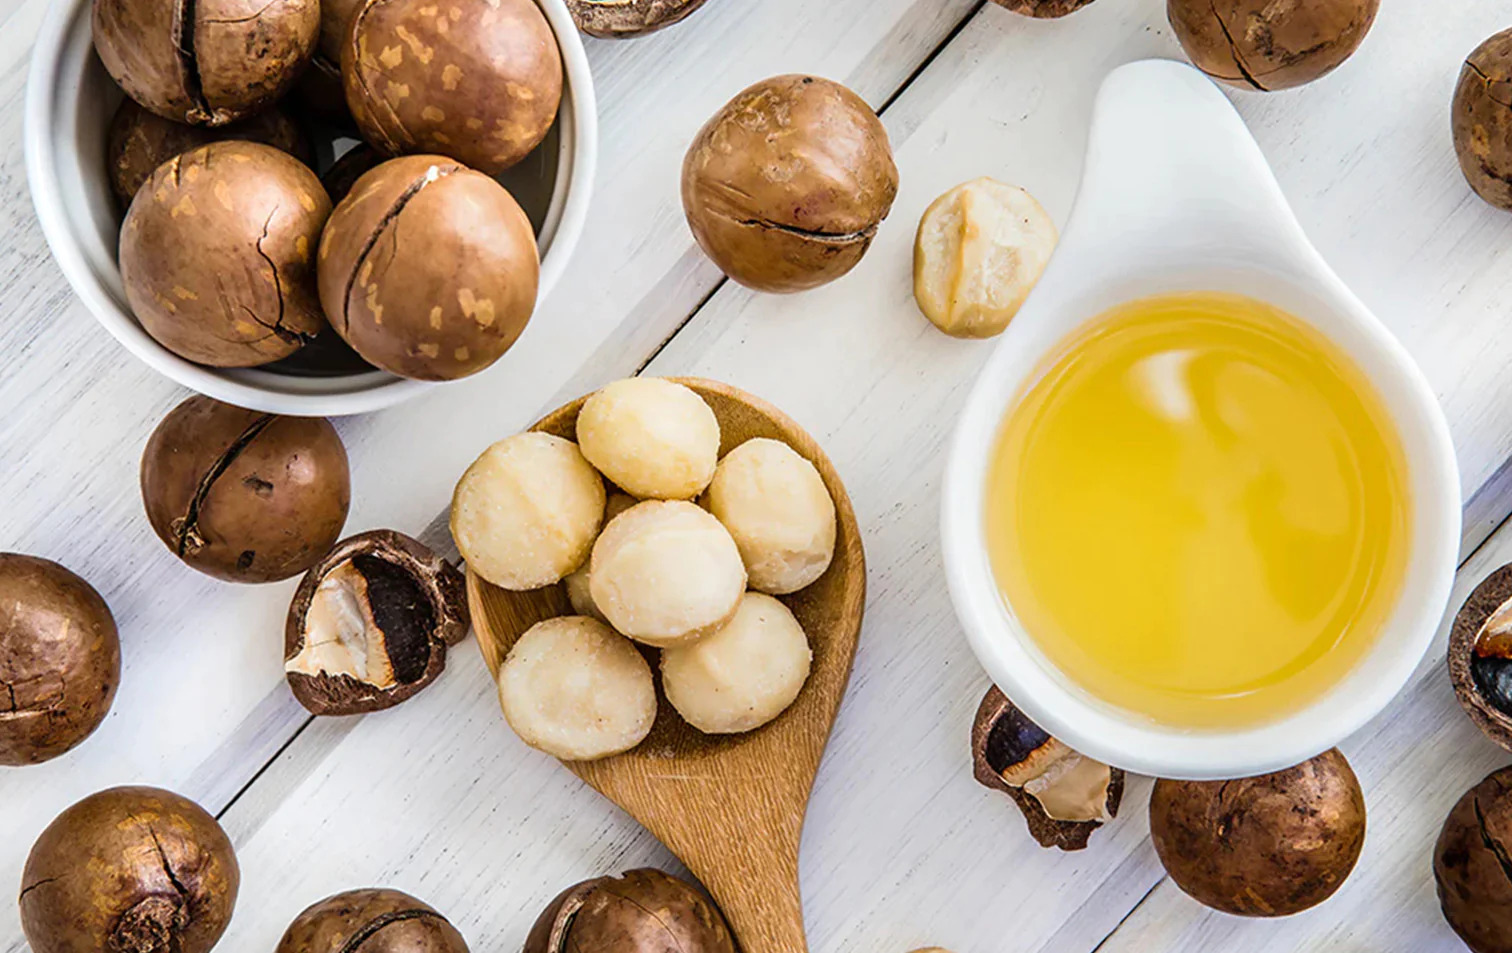 15 Facts About Macadamia Oil - Facts.net